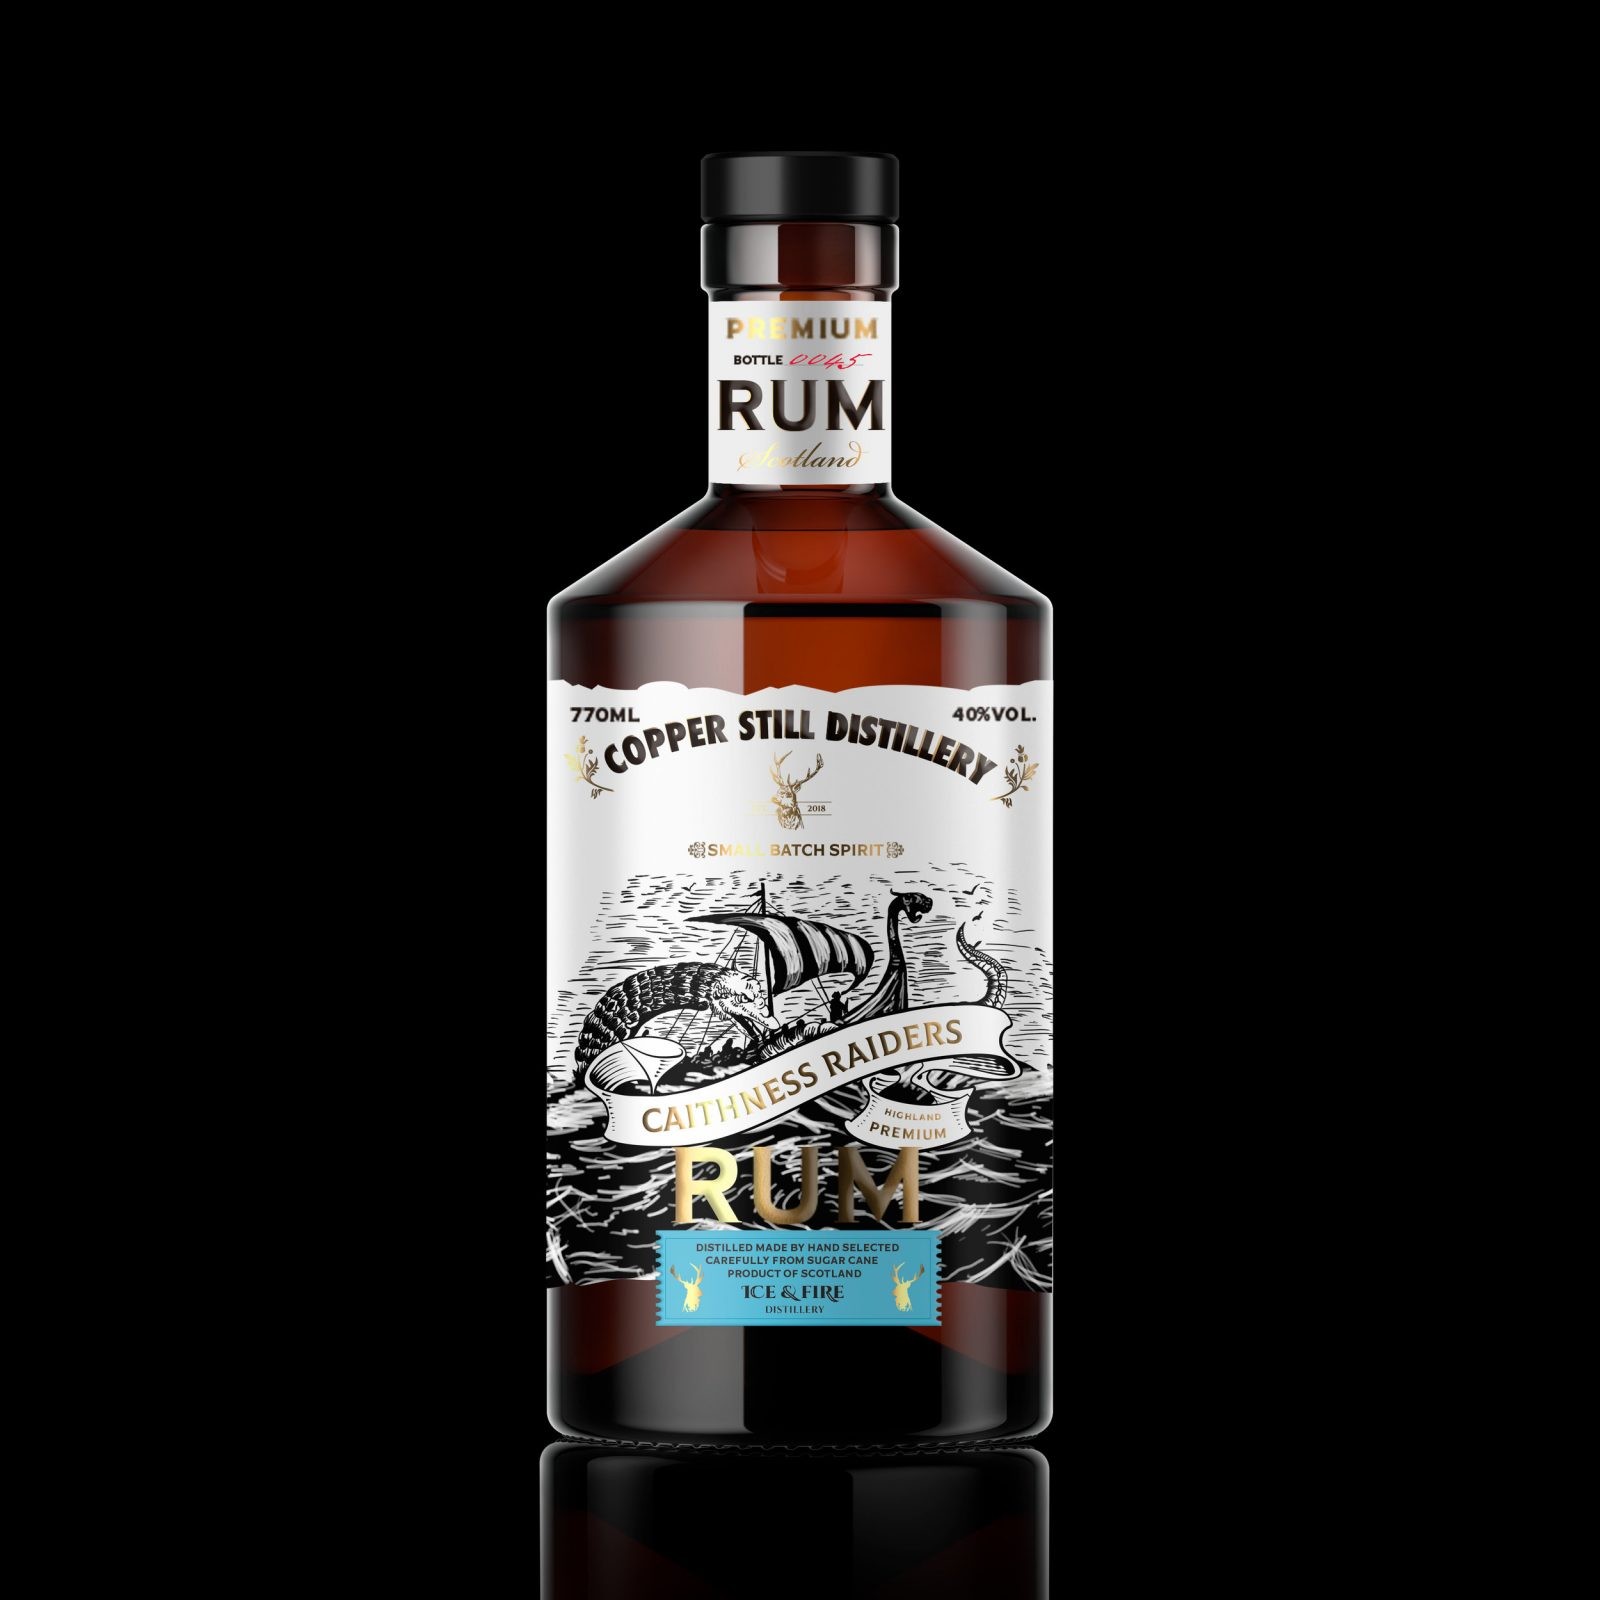 Caithness Raiders Rum Packaging Design, Born from the Heart of the Sea